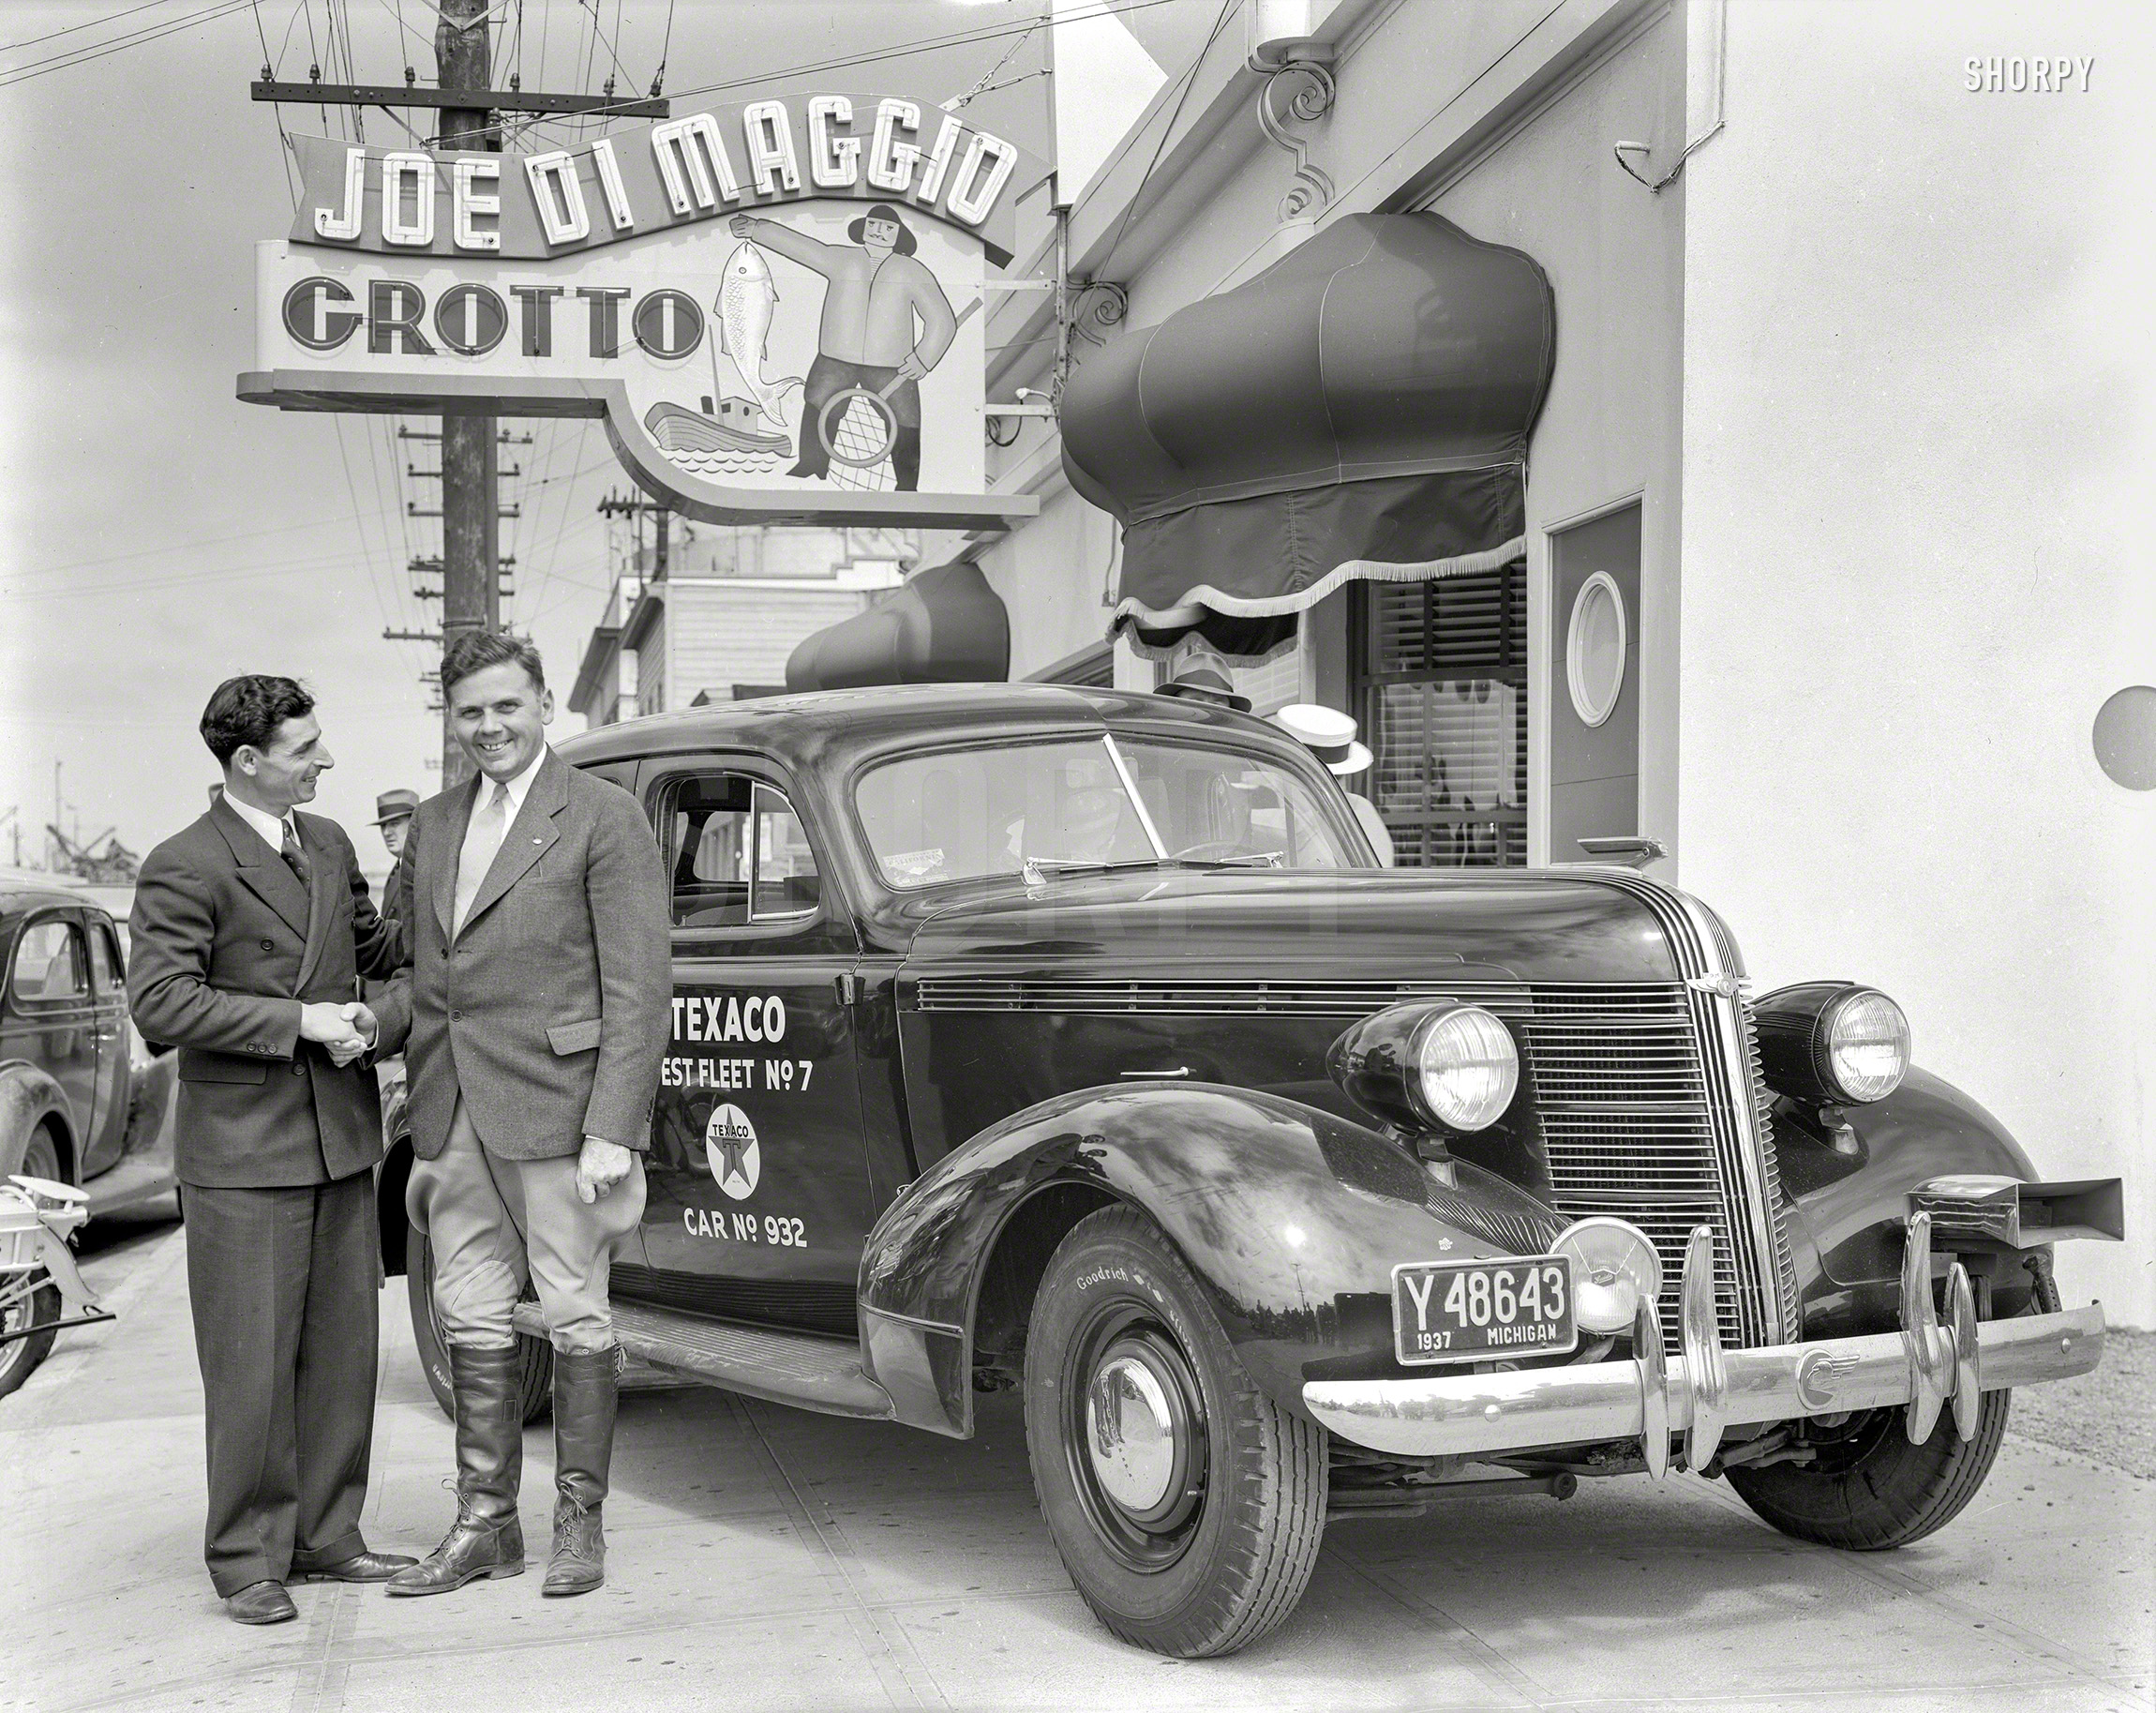 June 15, 1937. Fisherman's Wharf in San Francisco. "Texaco Test Fleet auto at Joe DiMaggio Grotto. Driver of Pontiac with restaurant manager Tom DiMaggio." 8x10 film negative from the Wyland Stanley collection. View full size.